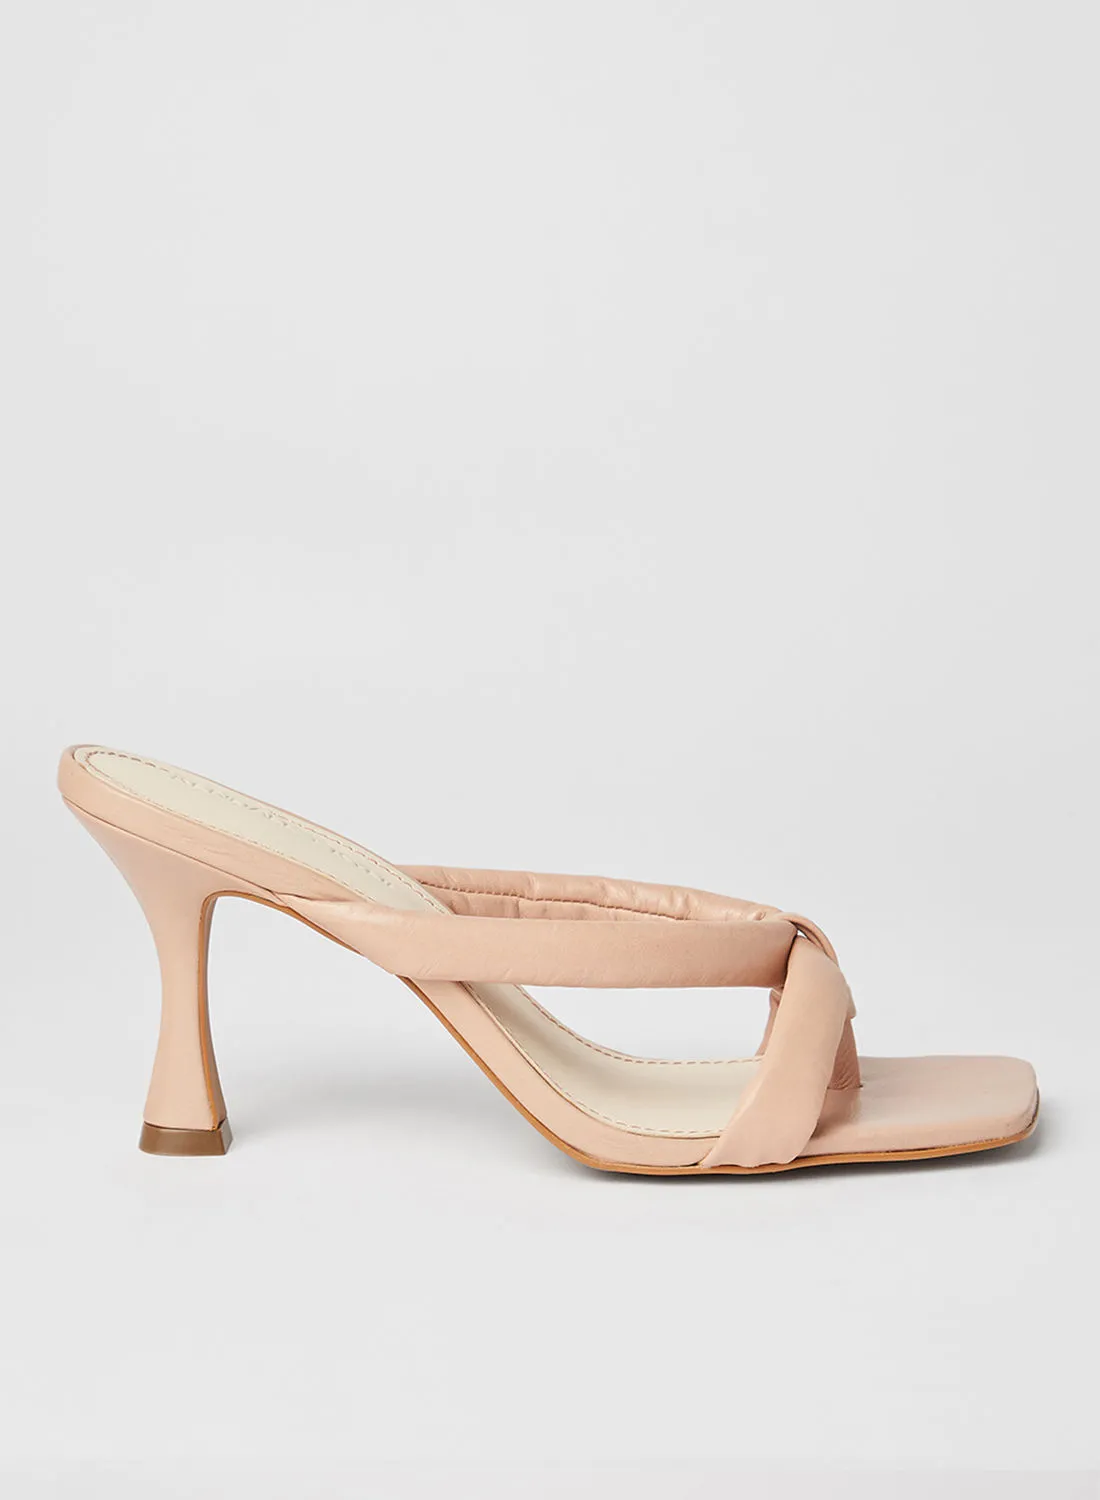 KENDALL + KYLIE Bal Leather Sandals Nude